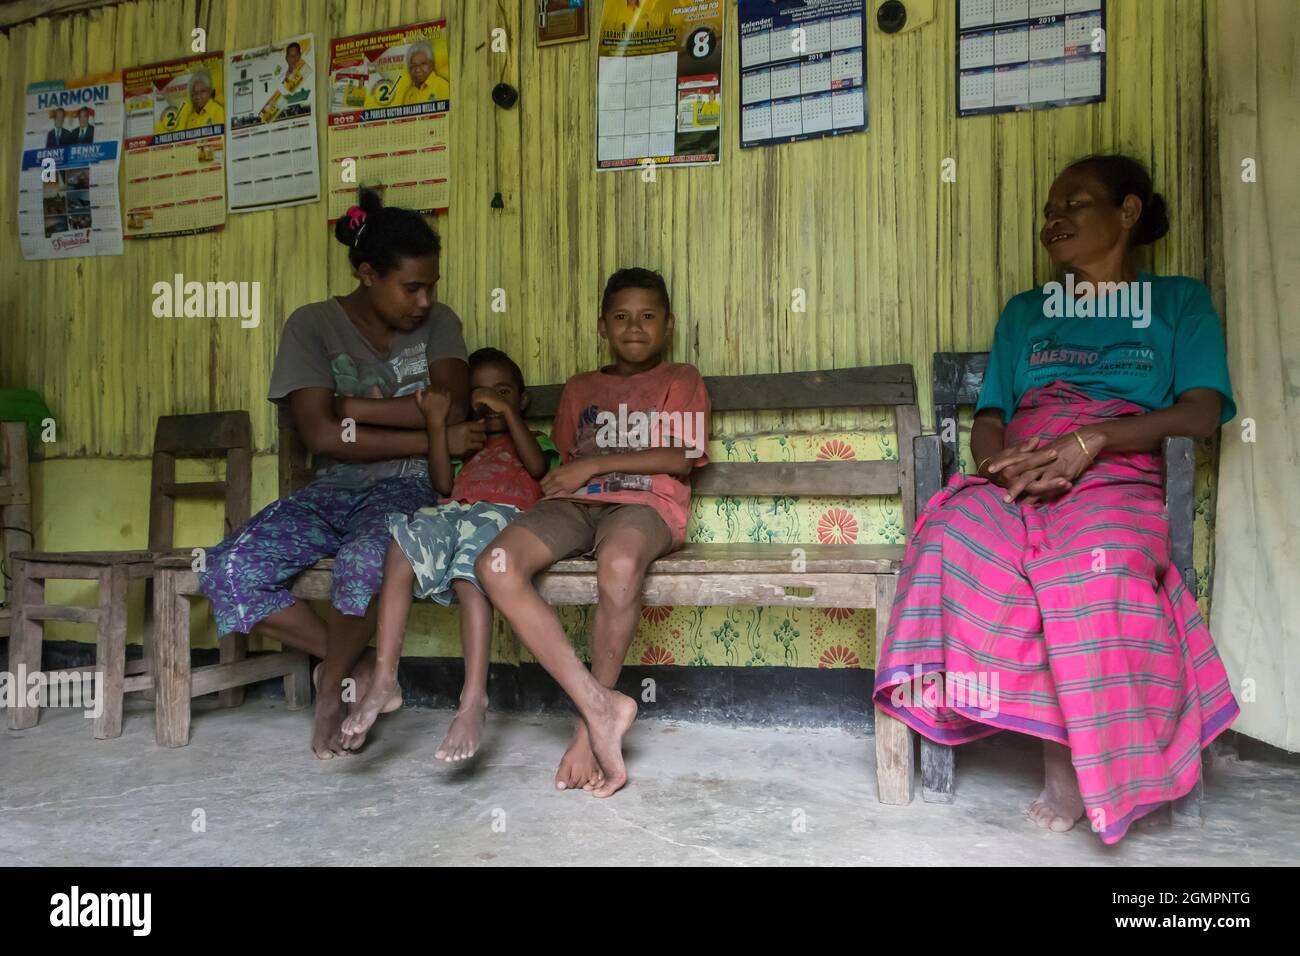 Mother,sons and grandmother sitting on a wooden bench in a room with yellow painted bamboo walls. Oilasi village, West Timor, Indonesia Stock Photo